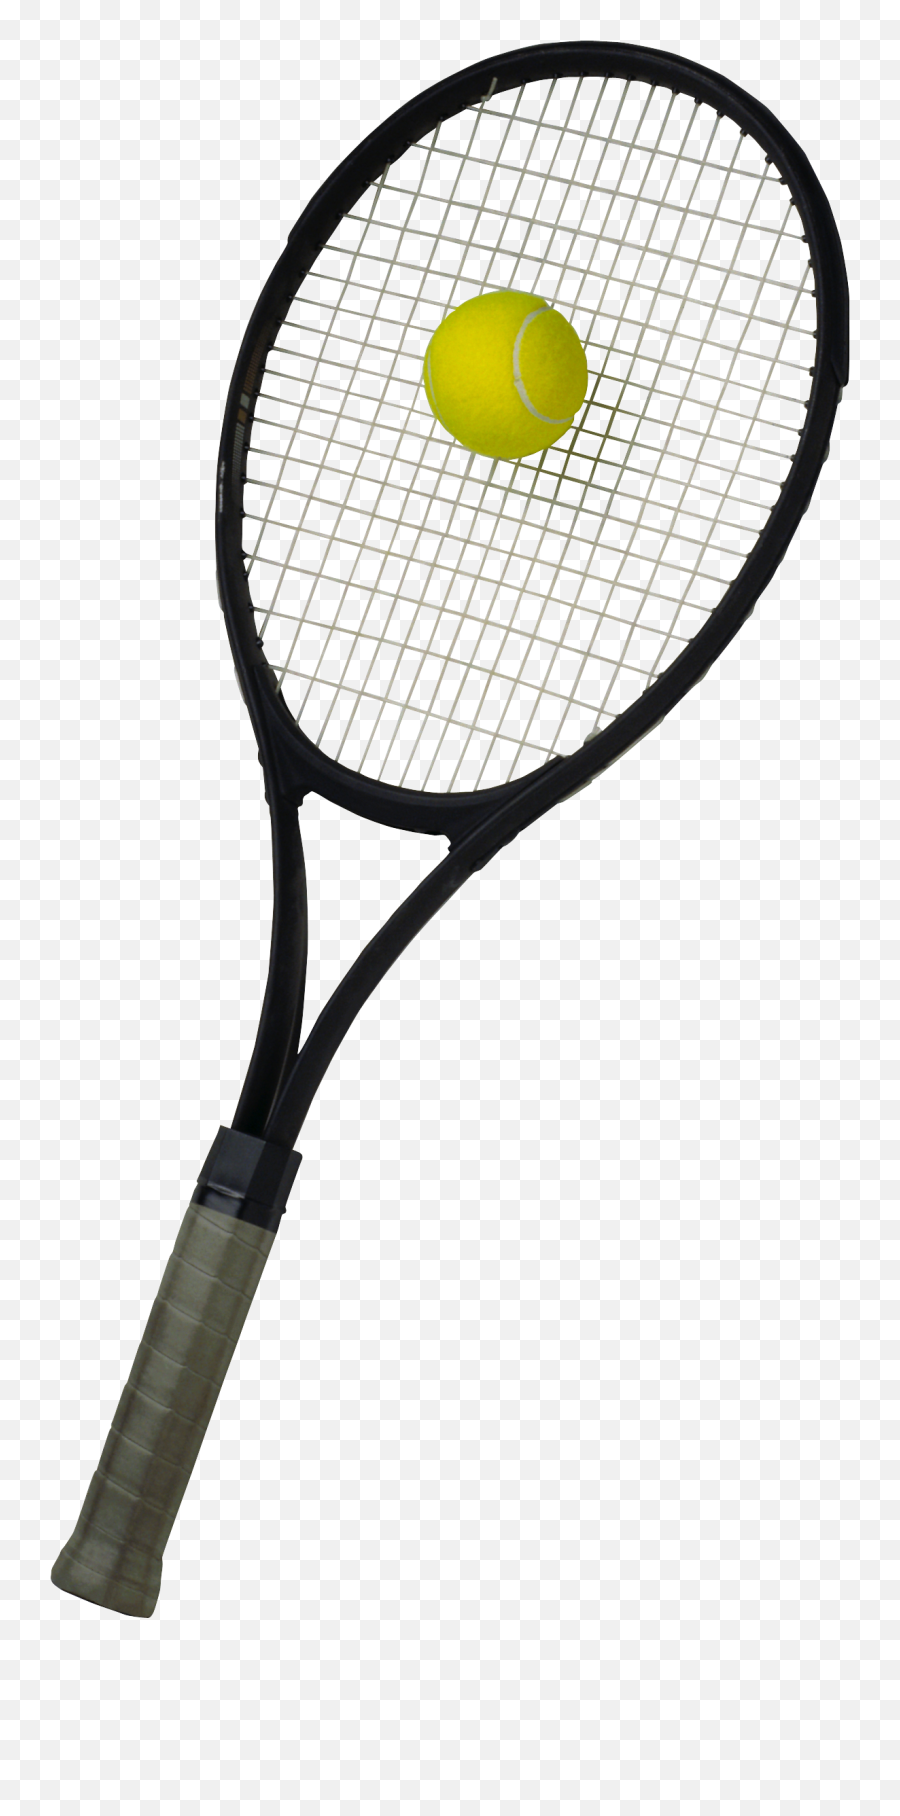 Tennis Racket With Ball Png Image - Tennis Racket And Ball Png,Tennis Ball Png